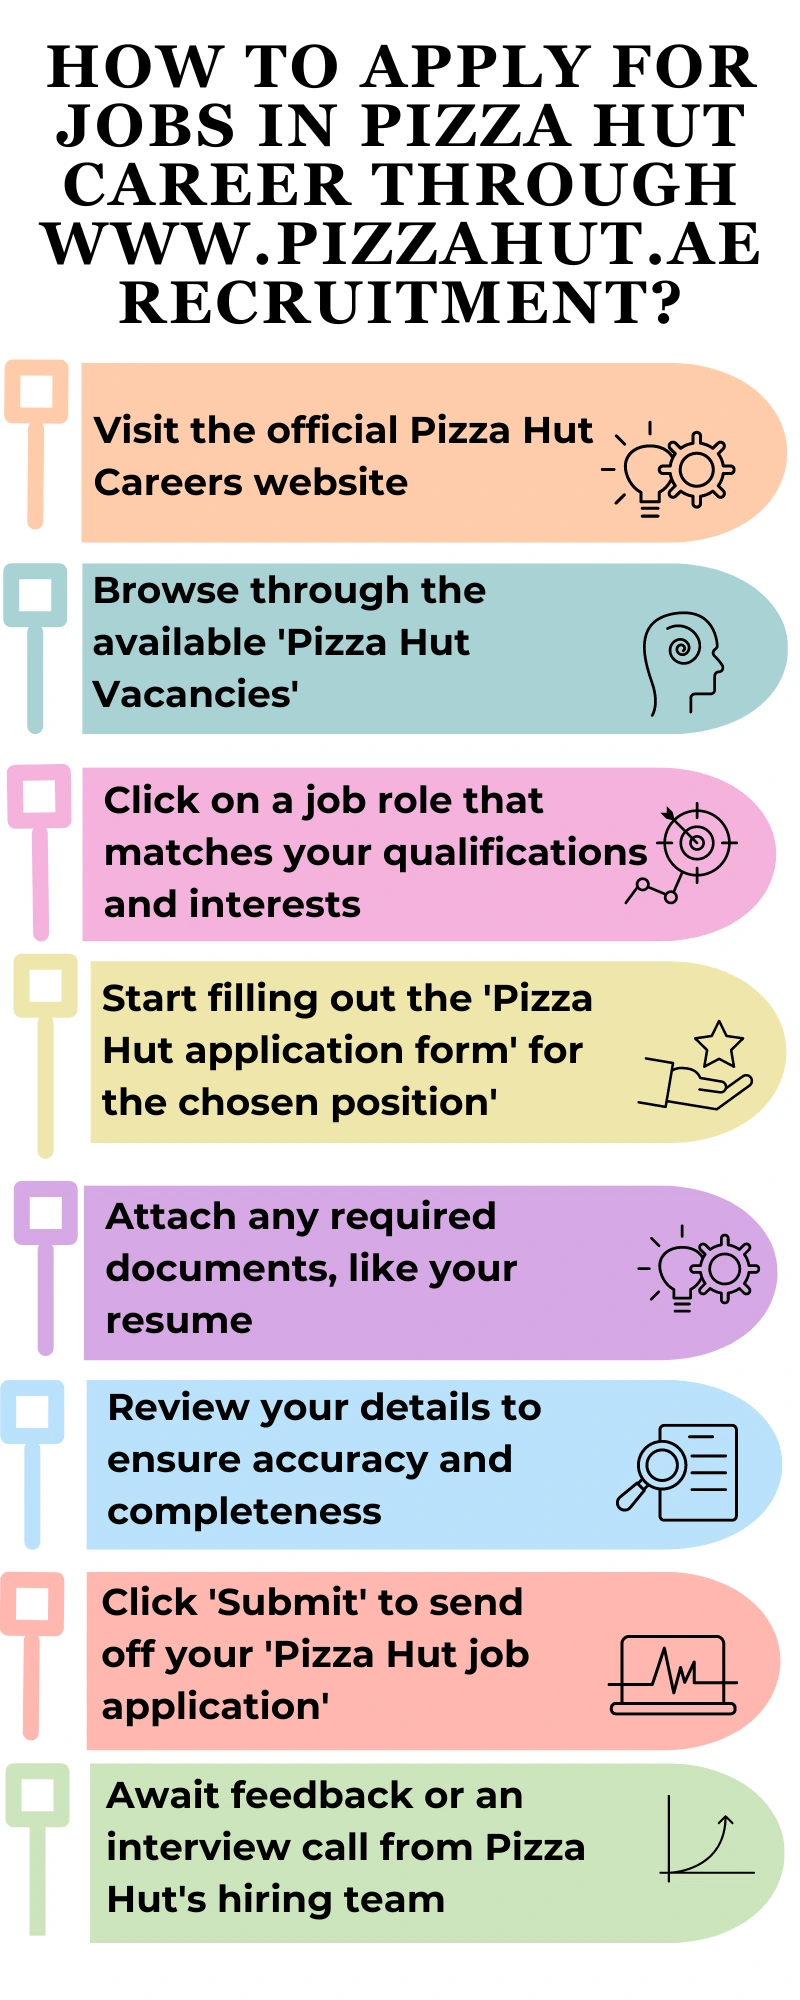 How to Apply for Jobs in Pizza Hut Career through www.pizzahut.ae recruitment?